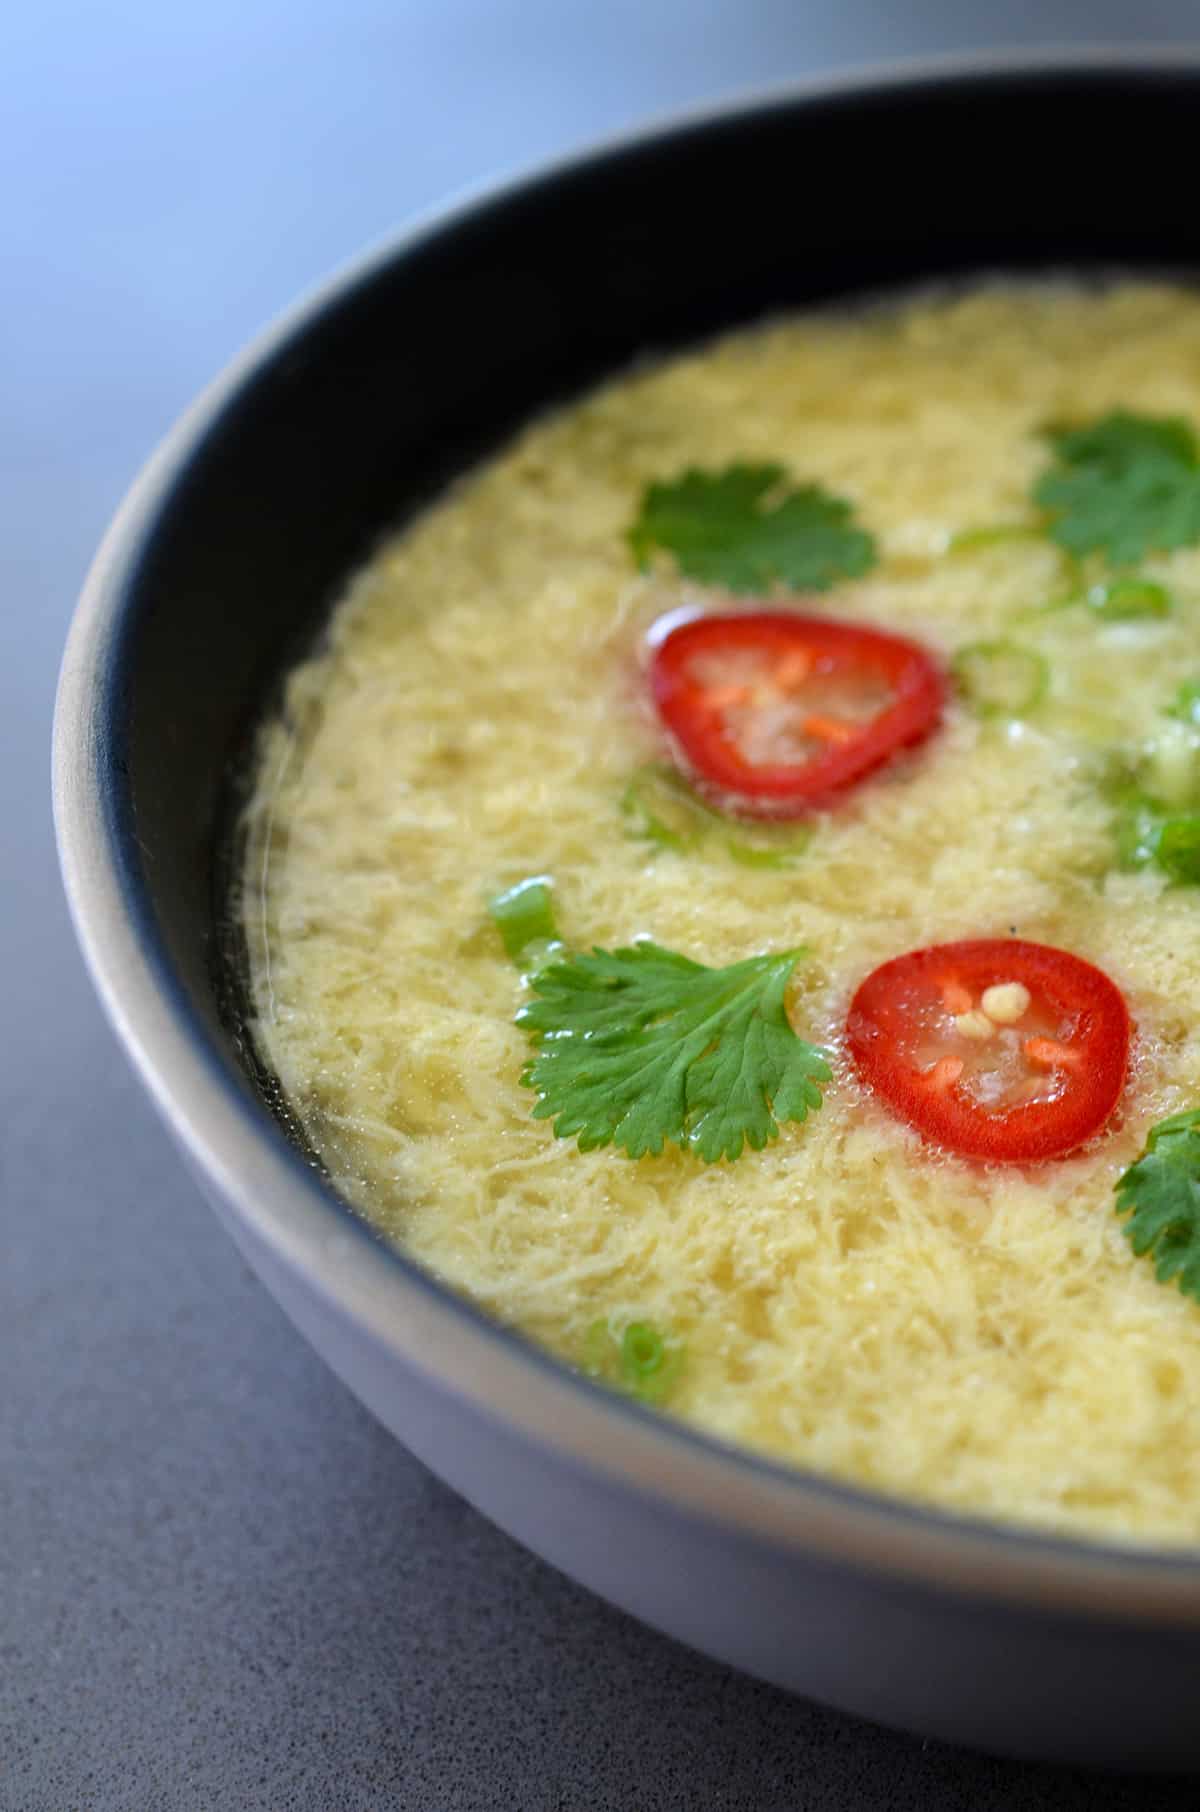 A bowl of egg drop soup topped with scallions, cilantro, and red peppers.